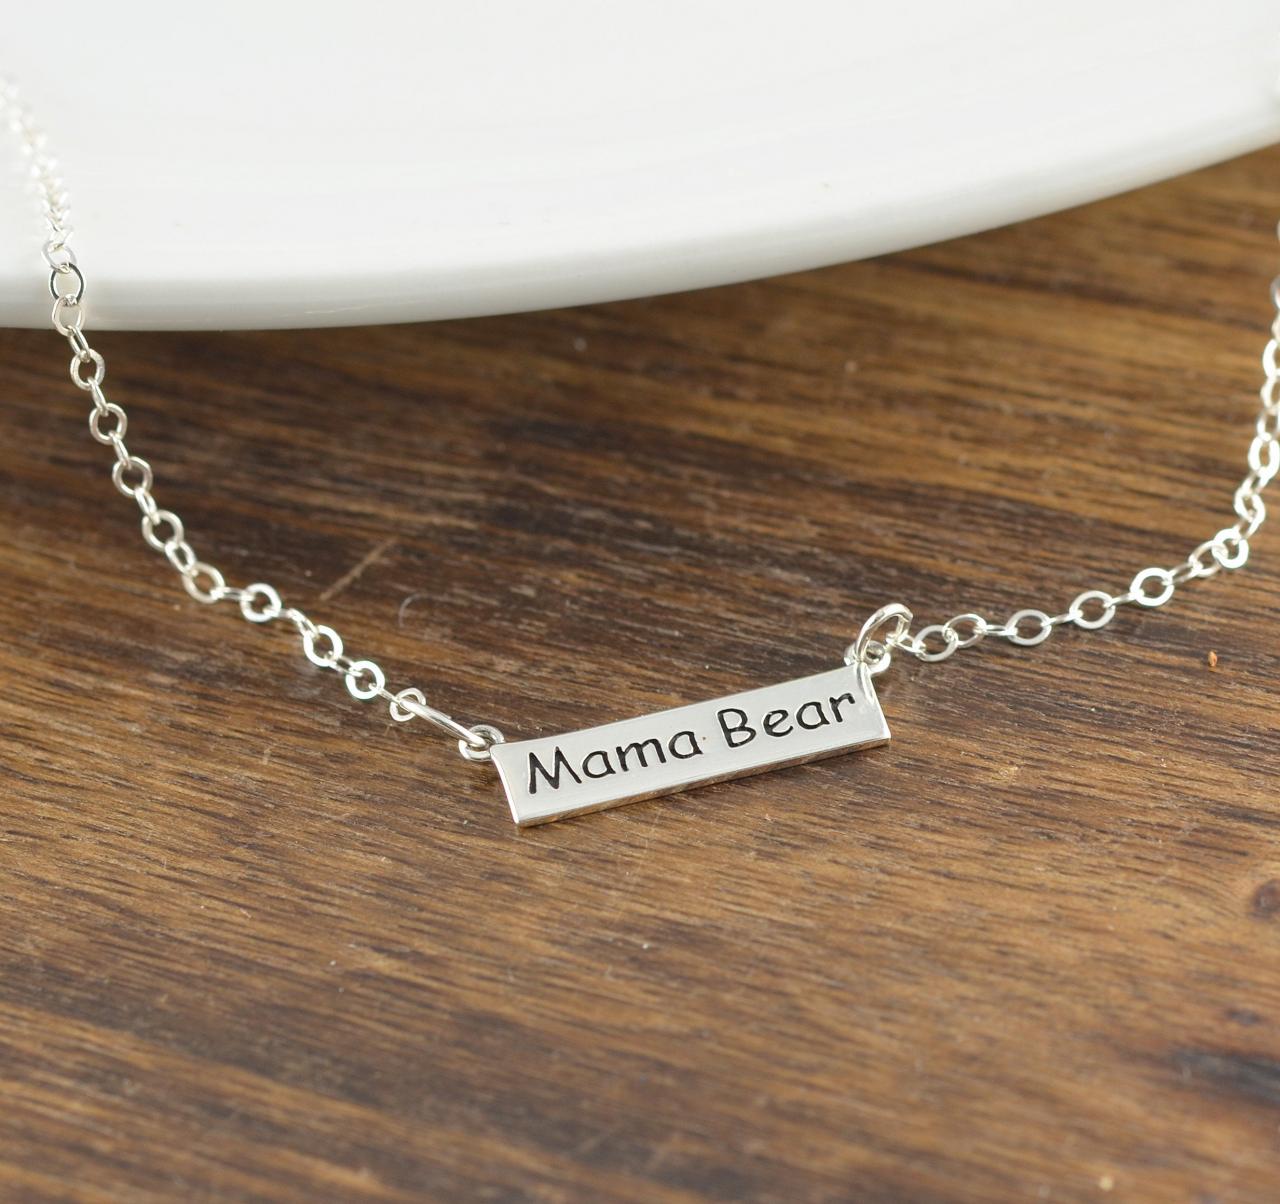 Mama Bear Necklace, Personalized Mother Necklace, Mommy Necklace, Mothers Day Gift, Gift For Mom, Mother's Jewelry, Mom Gift, Mom